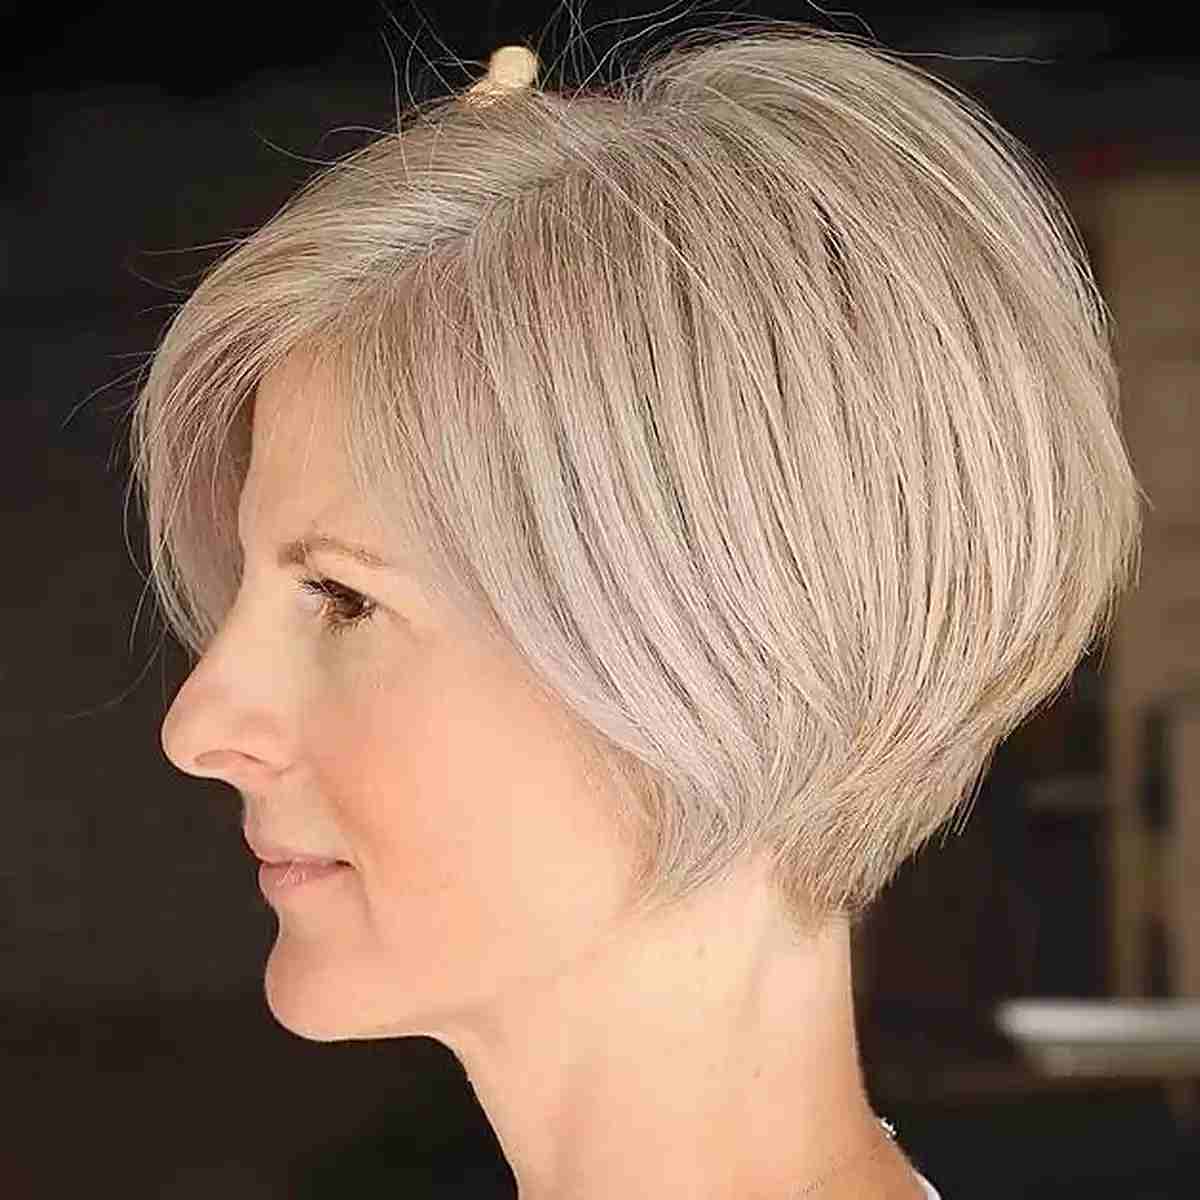 Jaw-Length Bixie Cut with Layers for women with short blonde hair